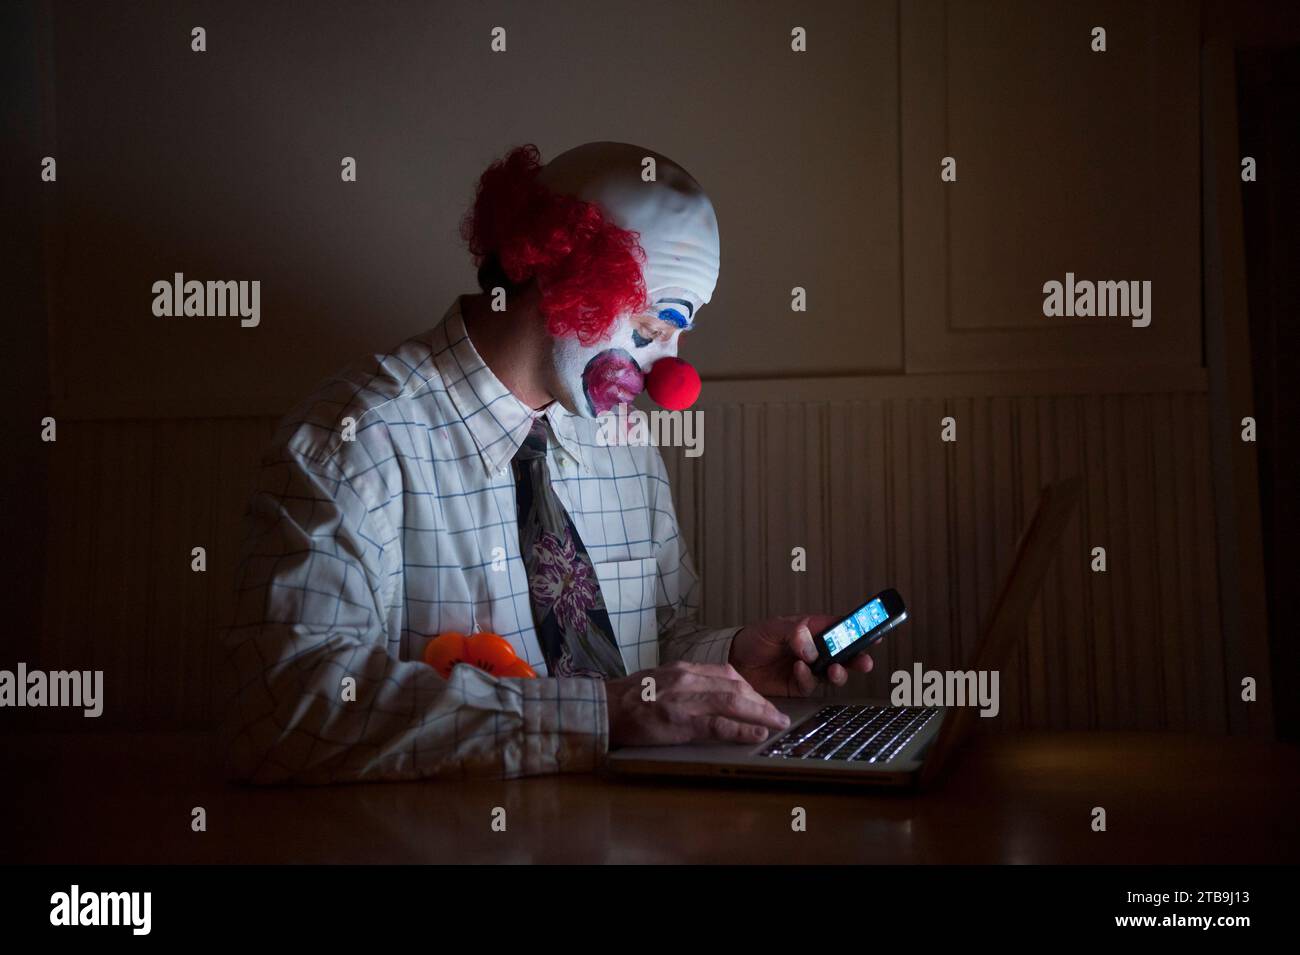 Clown wearing a shirt and tie uses a laptop computer and smart phone simultaneously; Lincoln, Nebraska, United States of America Stock Photo